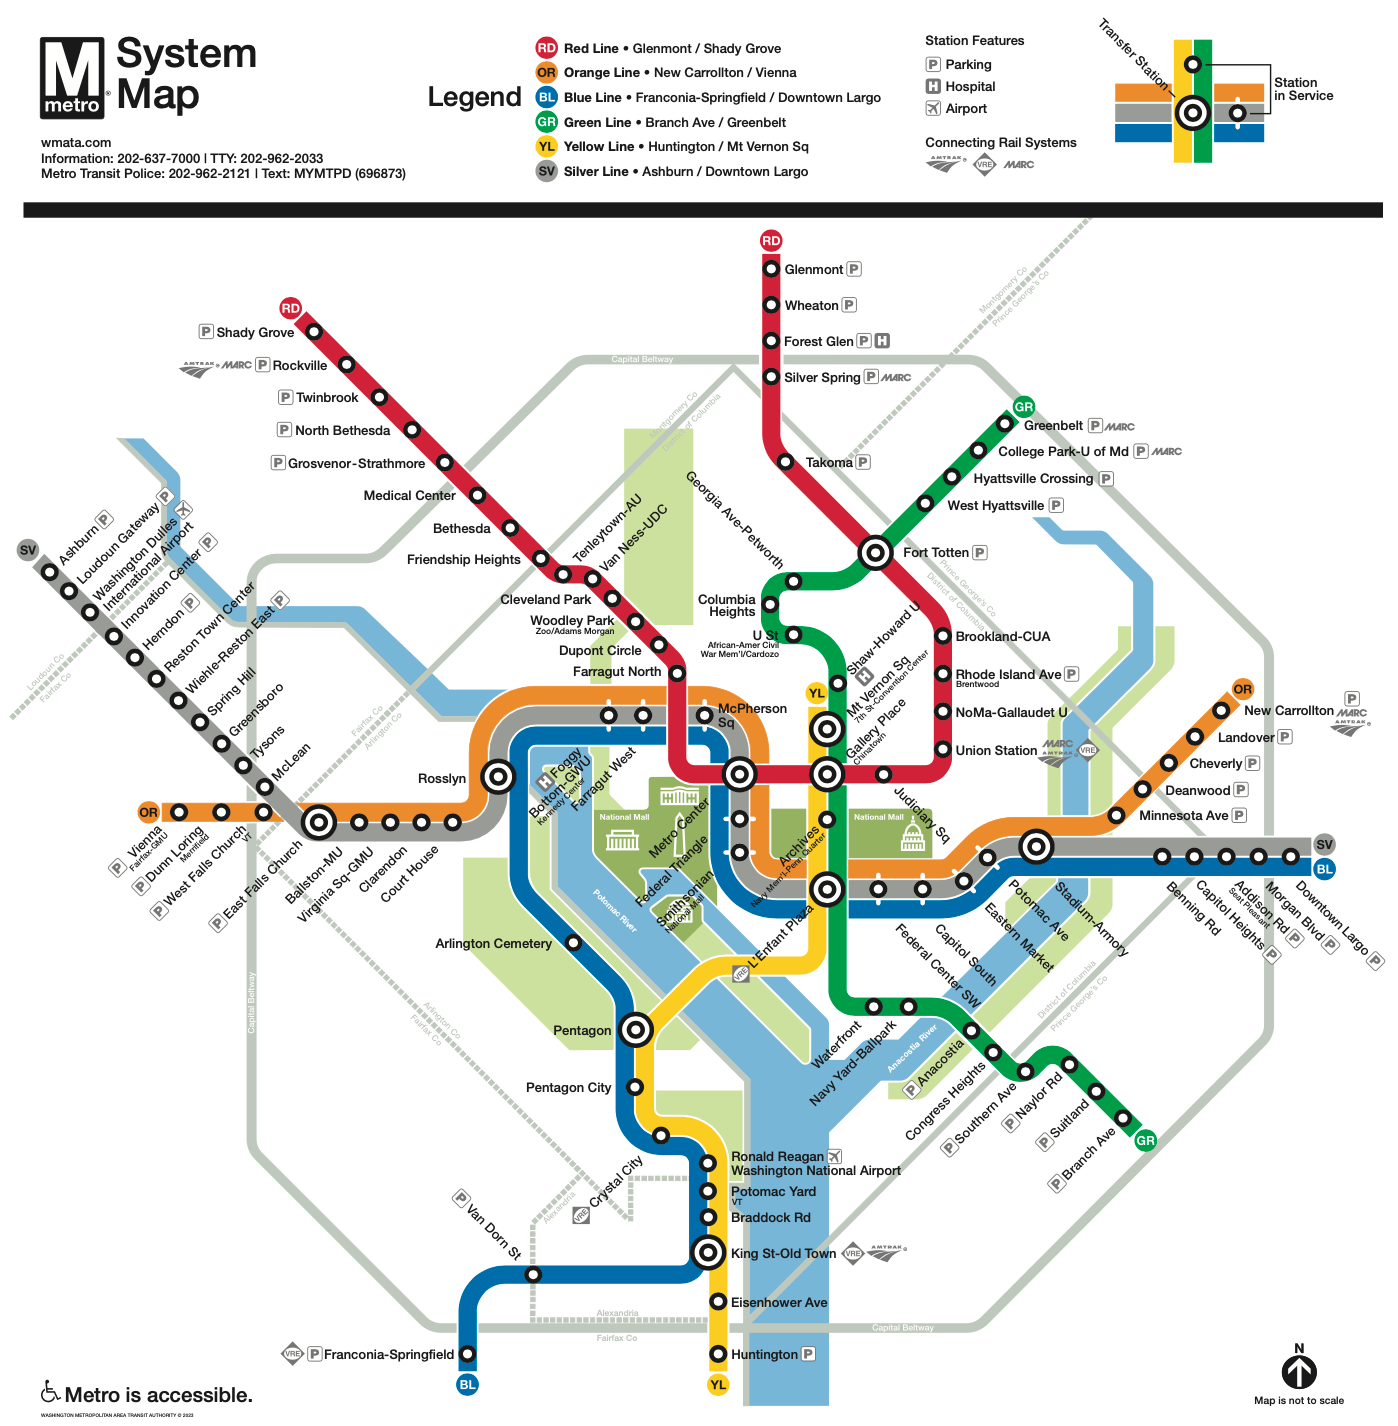 map of the DC metro system